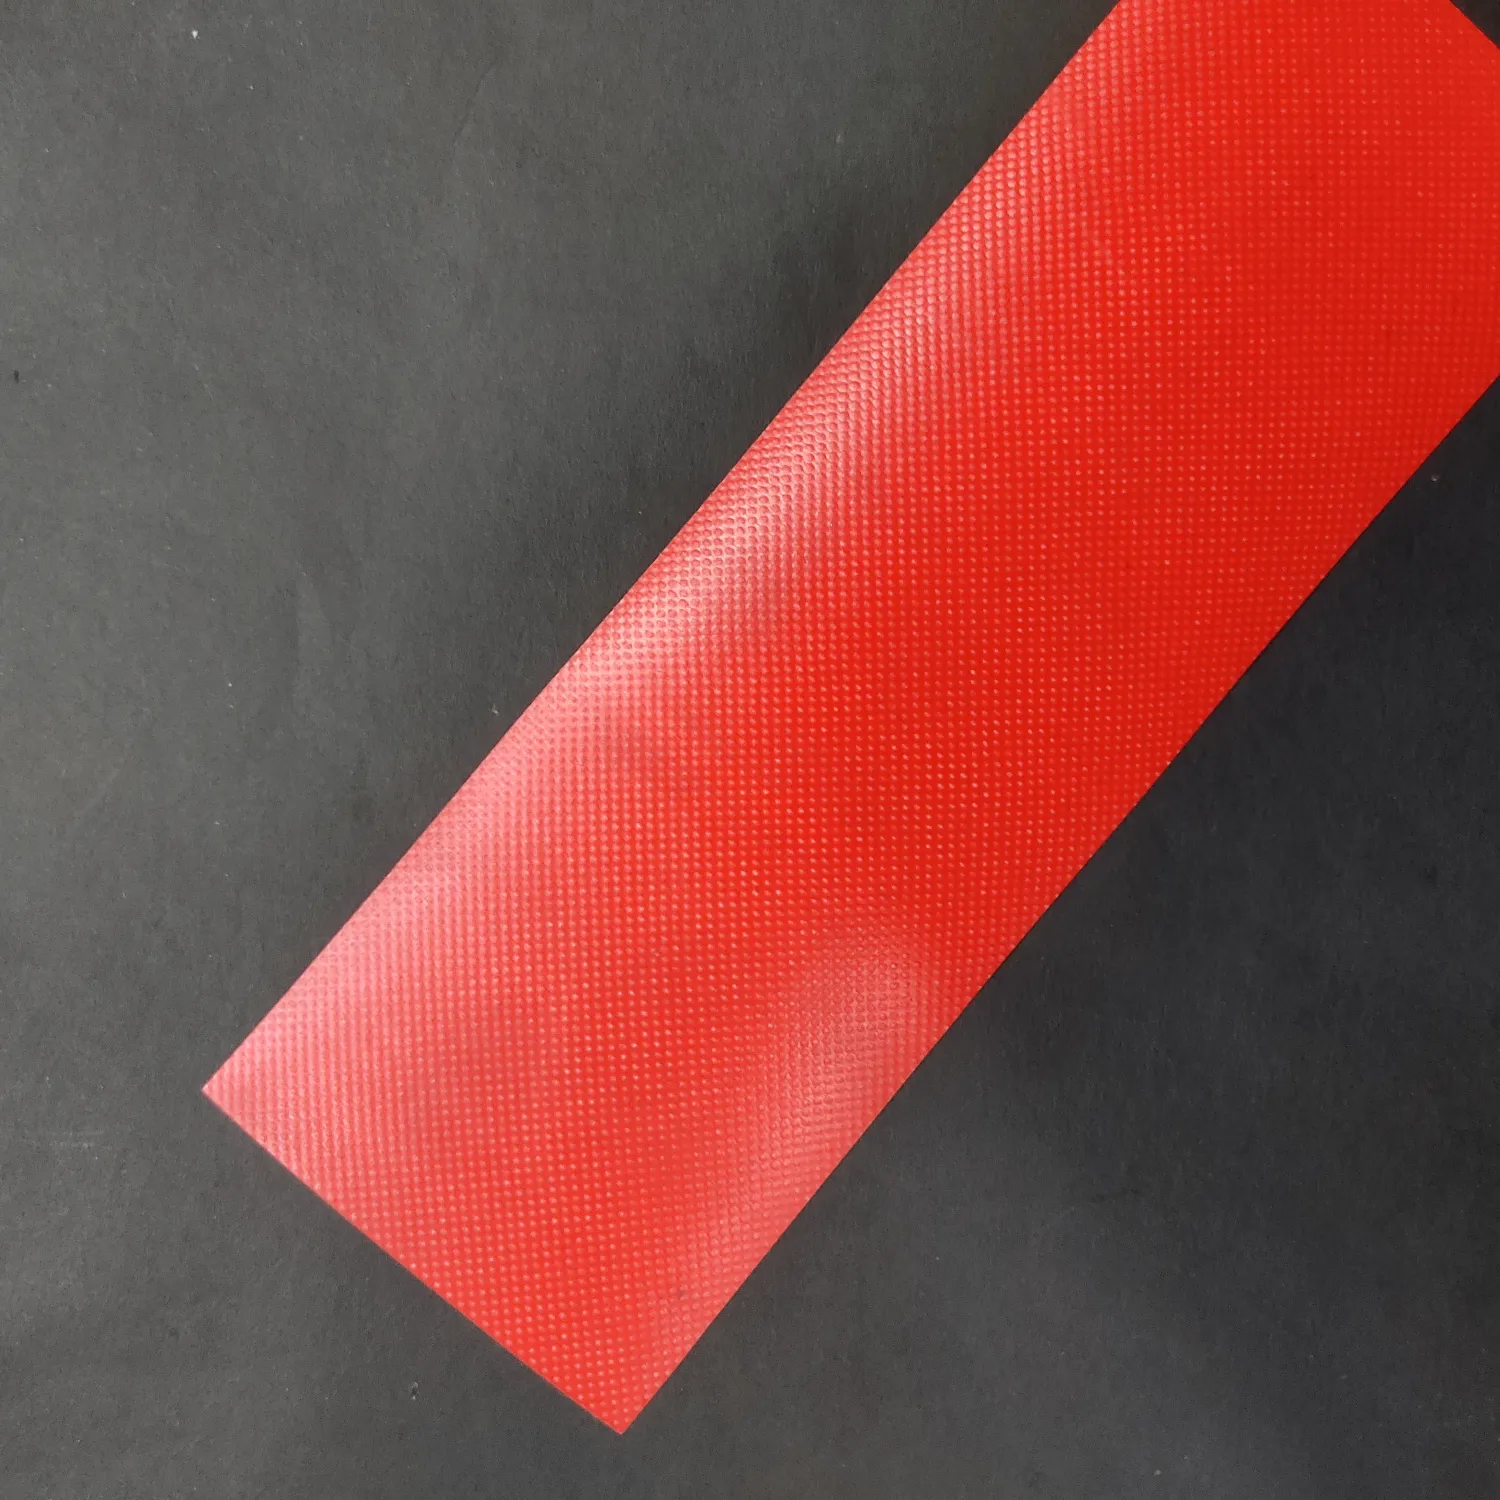 CSC PVC Fabric back(yellow,red)